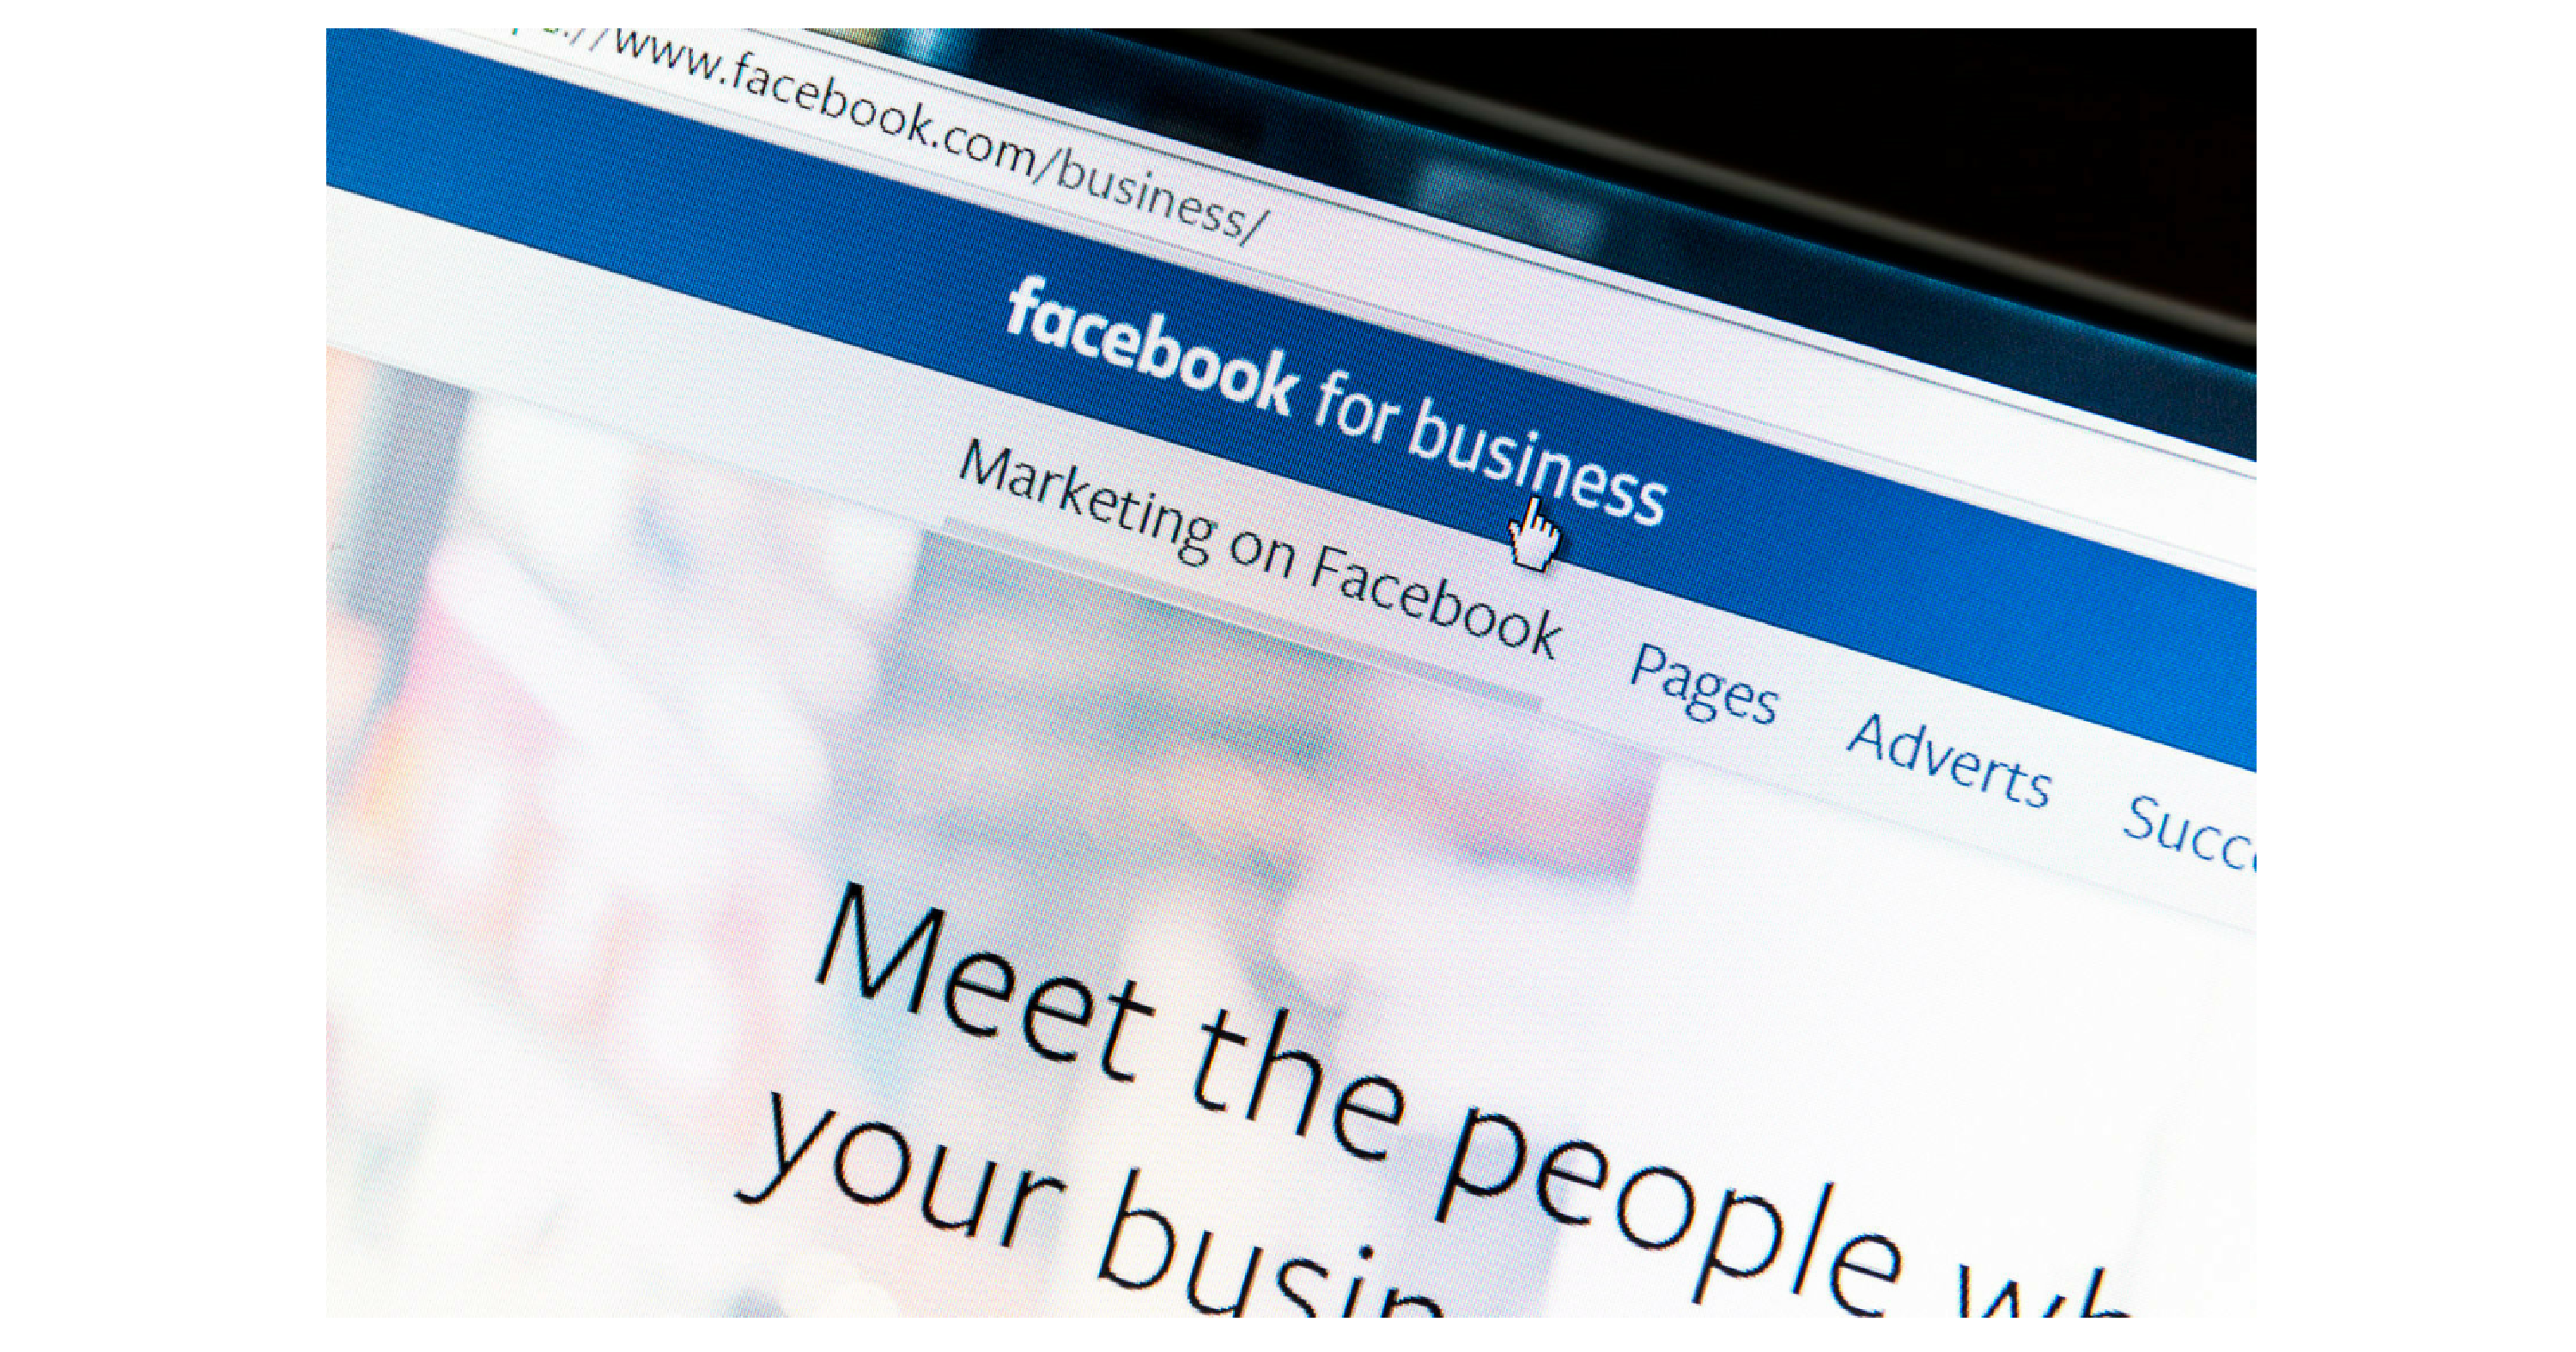 Why Many Small Businesses Should Market On Facebook